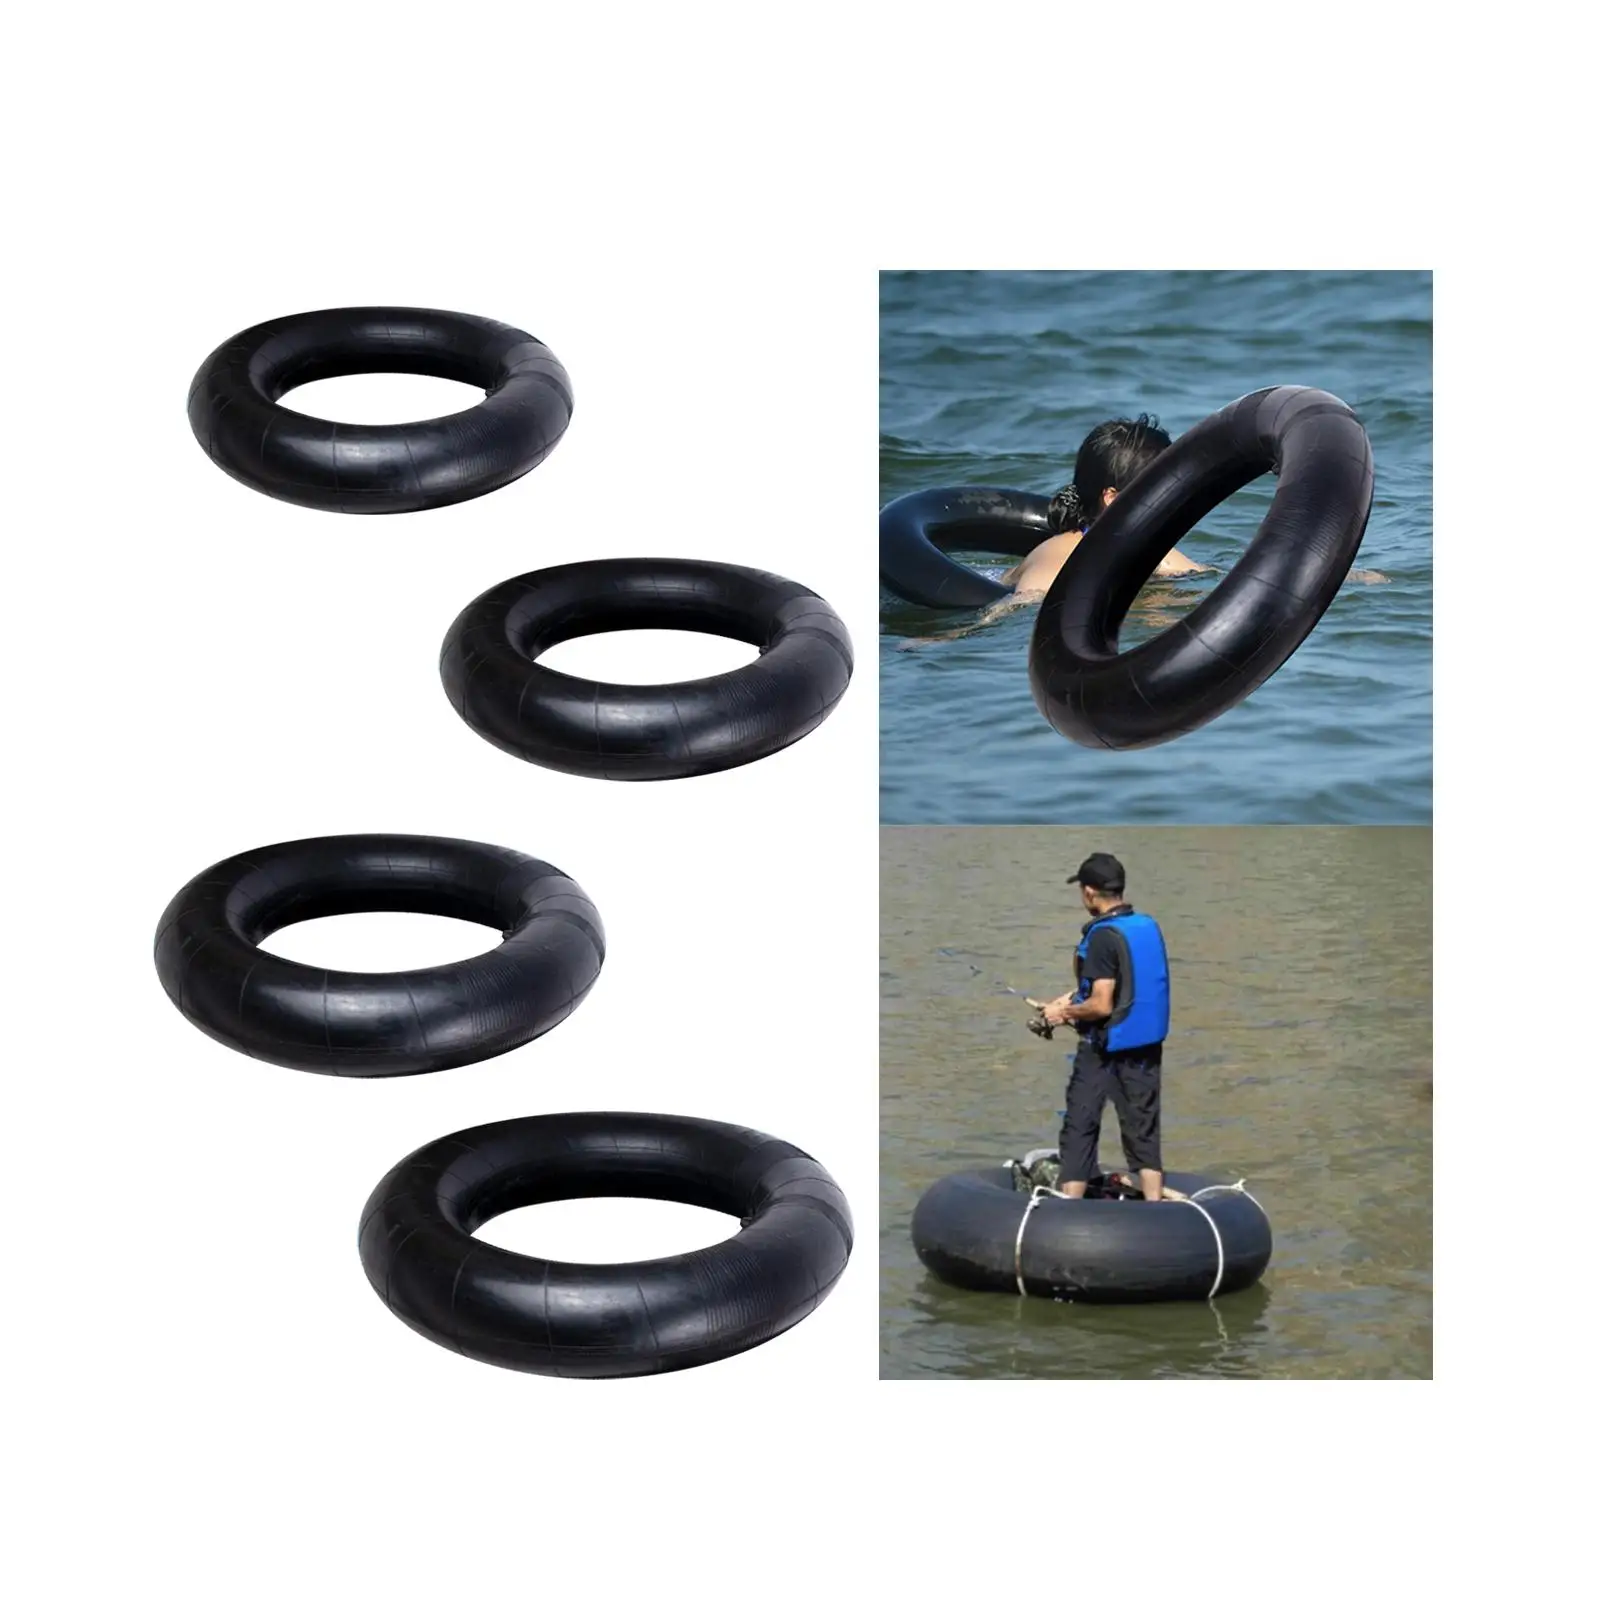 River Tube for Floating Tubing Floats for River Pool Lake Swimming Rings